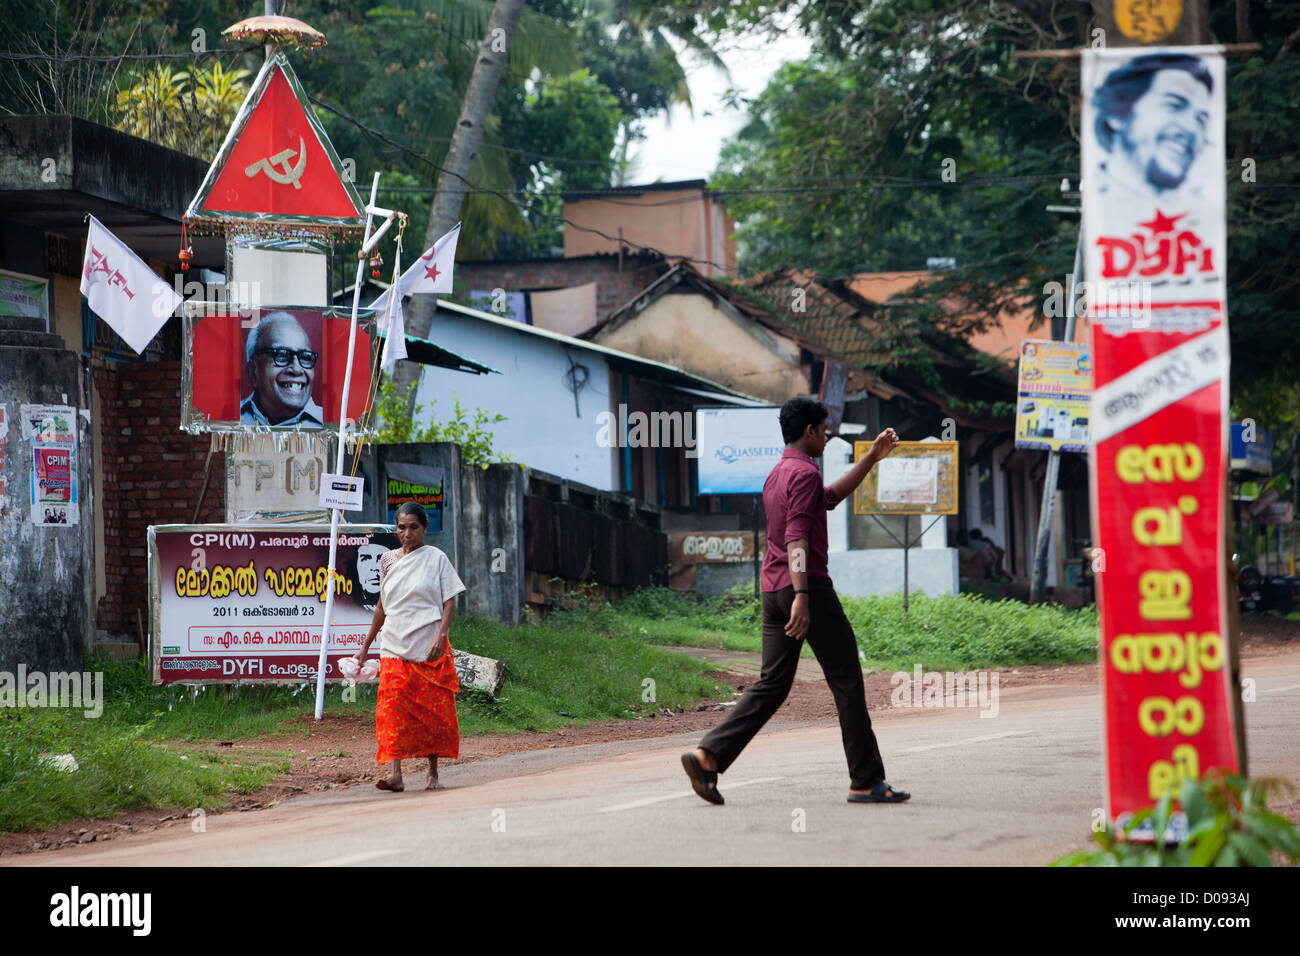 PROPAGANDA POSTER FROM THE KERALA COMMUNIST PARTY ON A STREET IN NEDUNGOLAM KERALA SOUTHERN INDIA ASIA Stock Photo